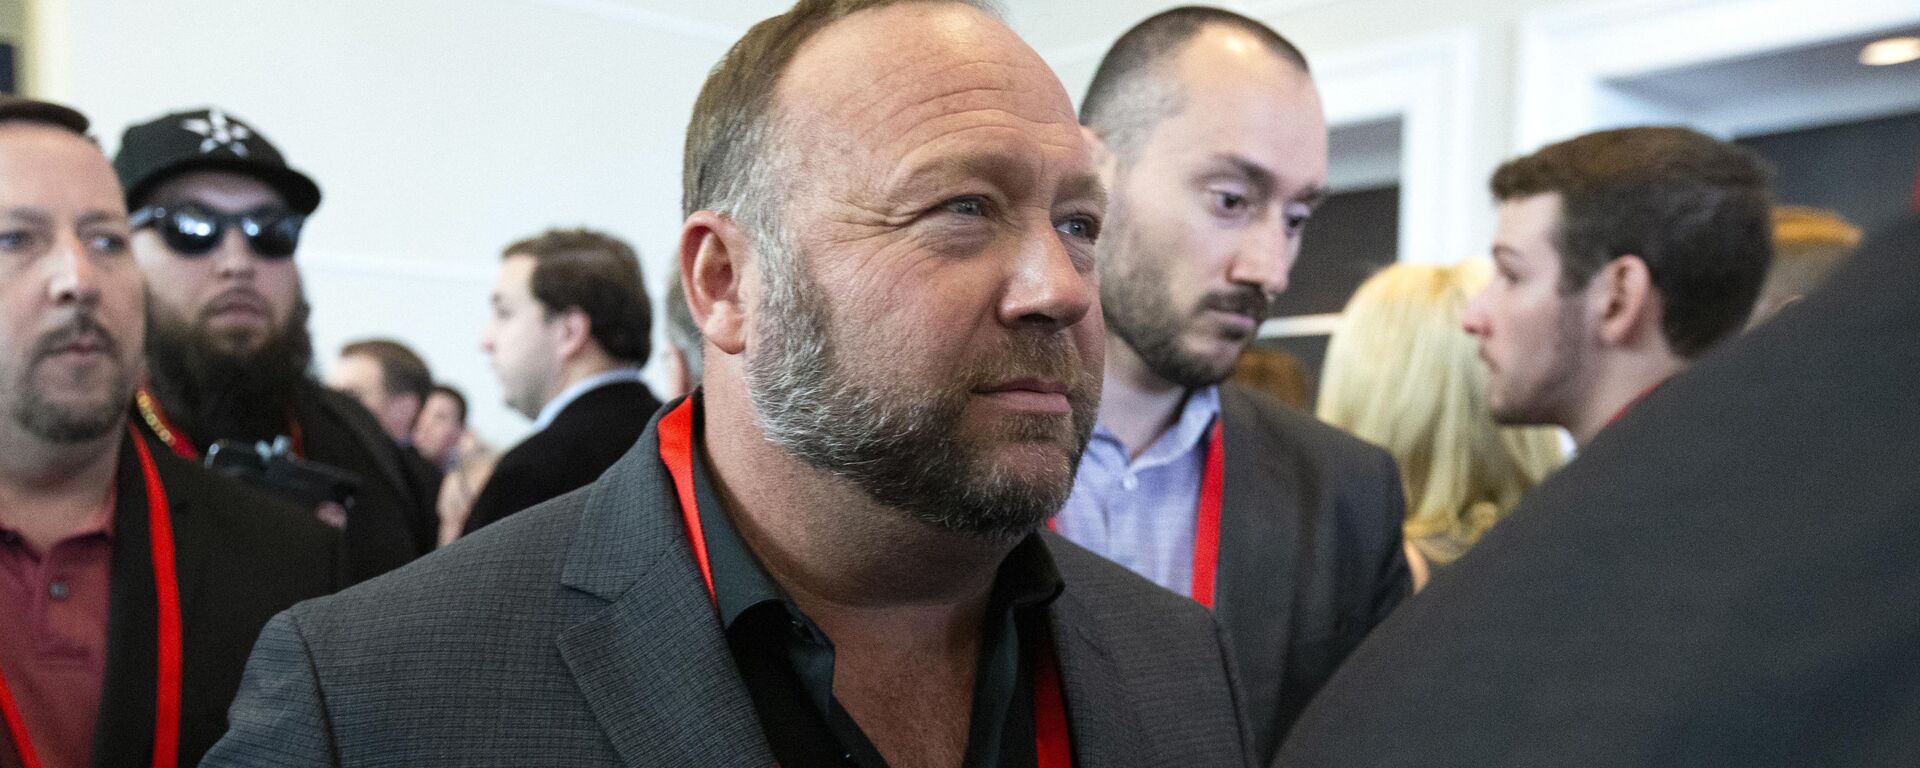 Conspiracy theorist Alex Jones walks at the Conservative Political Action Conference, CPAC 2020, at the National Harbor, in Oxon Hill, Md., Thursday, Feb. 27, 2020 - Sputnik International, 1920, 26.01.2022